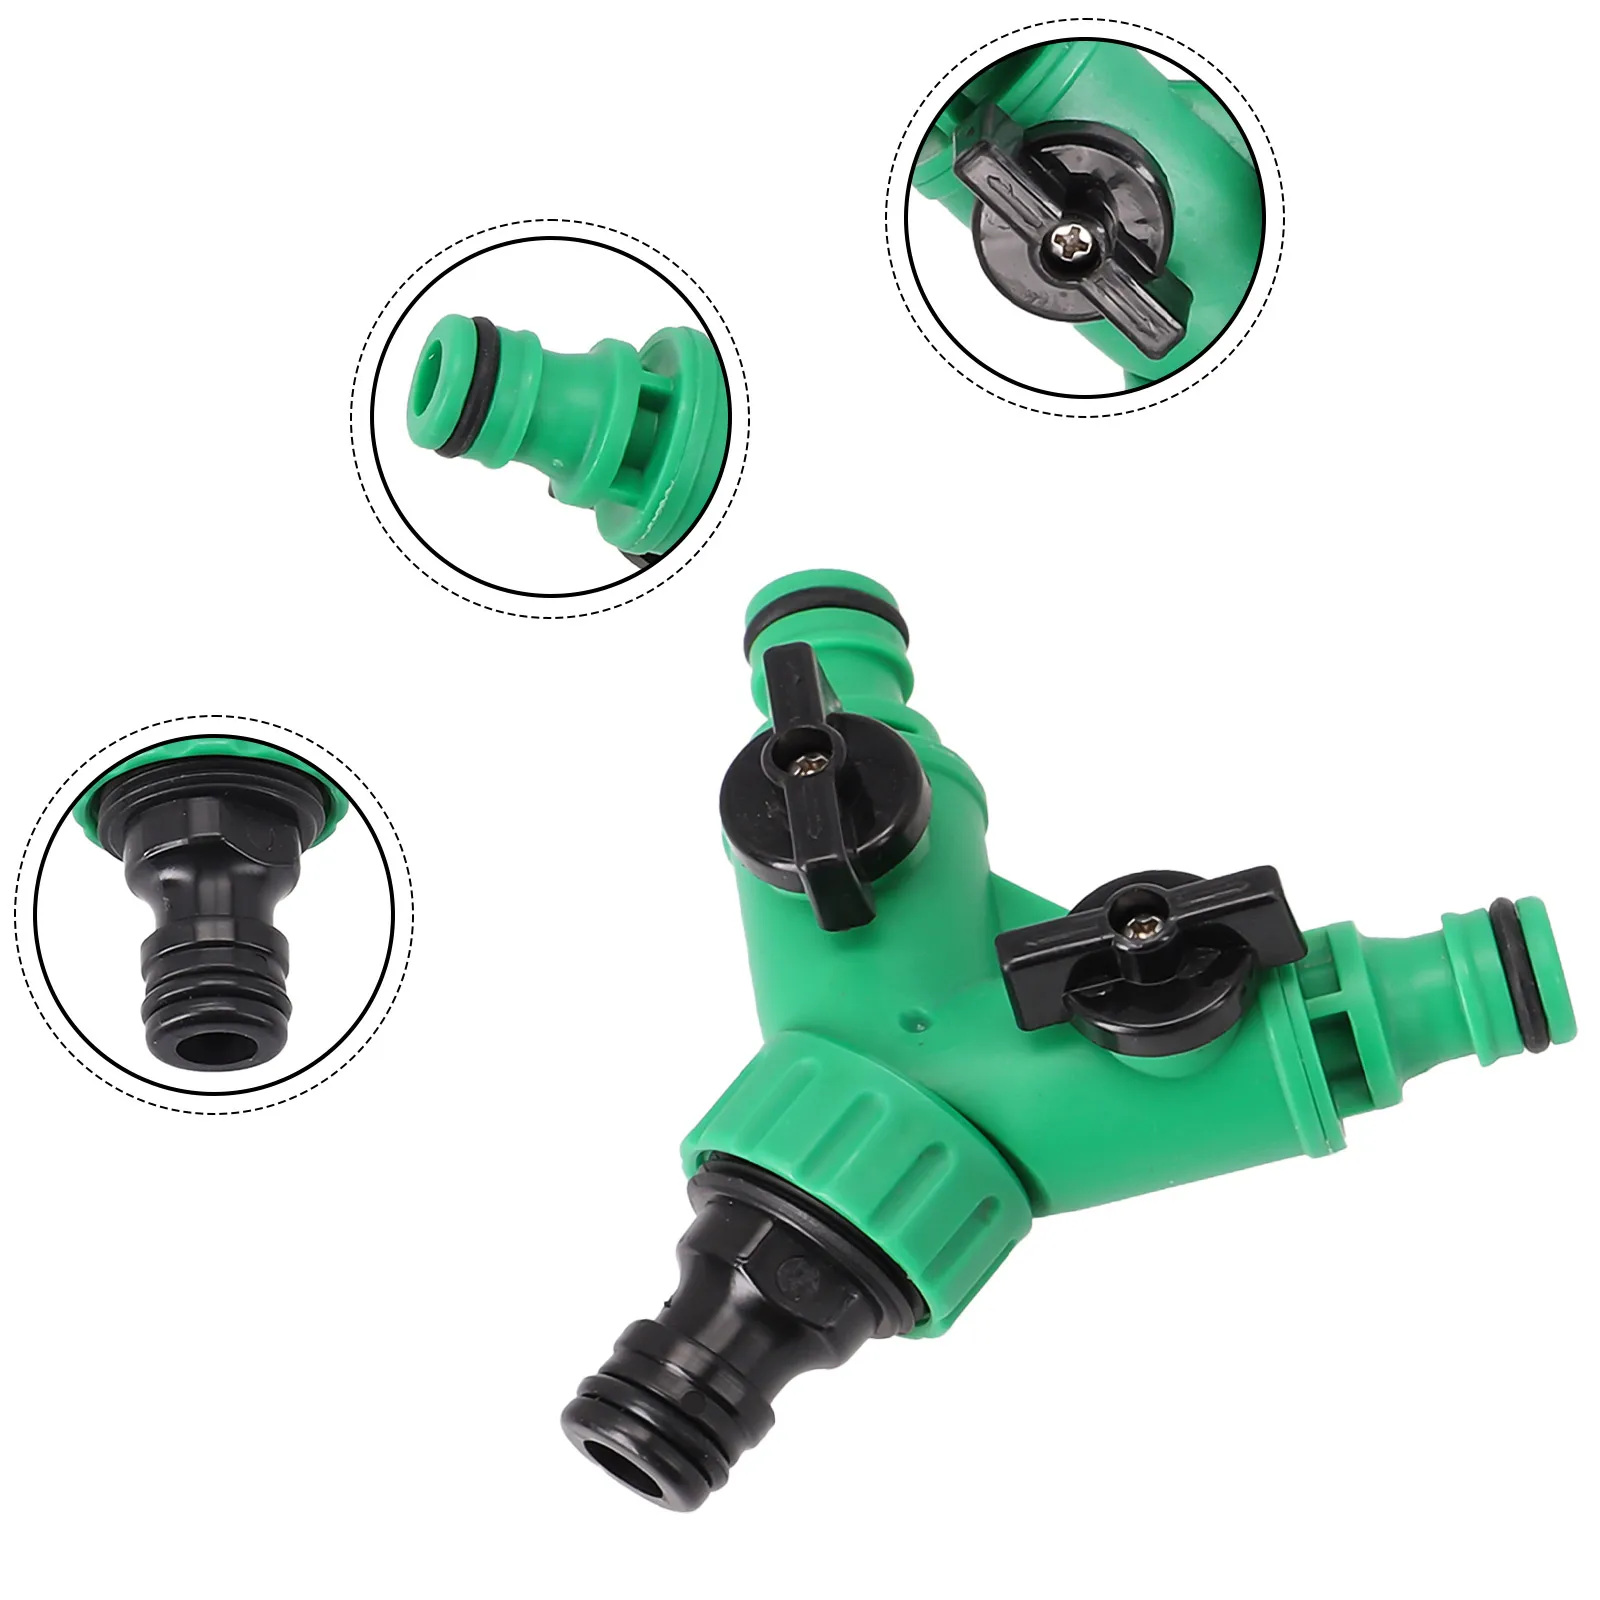 

Valve Water Quick Connector Y Shape Hose Pipe Plastic Splitter Tools 2 Way Accessory Adapter Elements Garden Parts